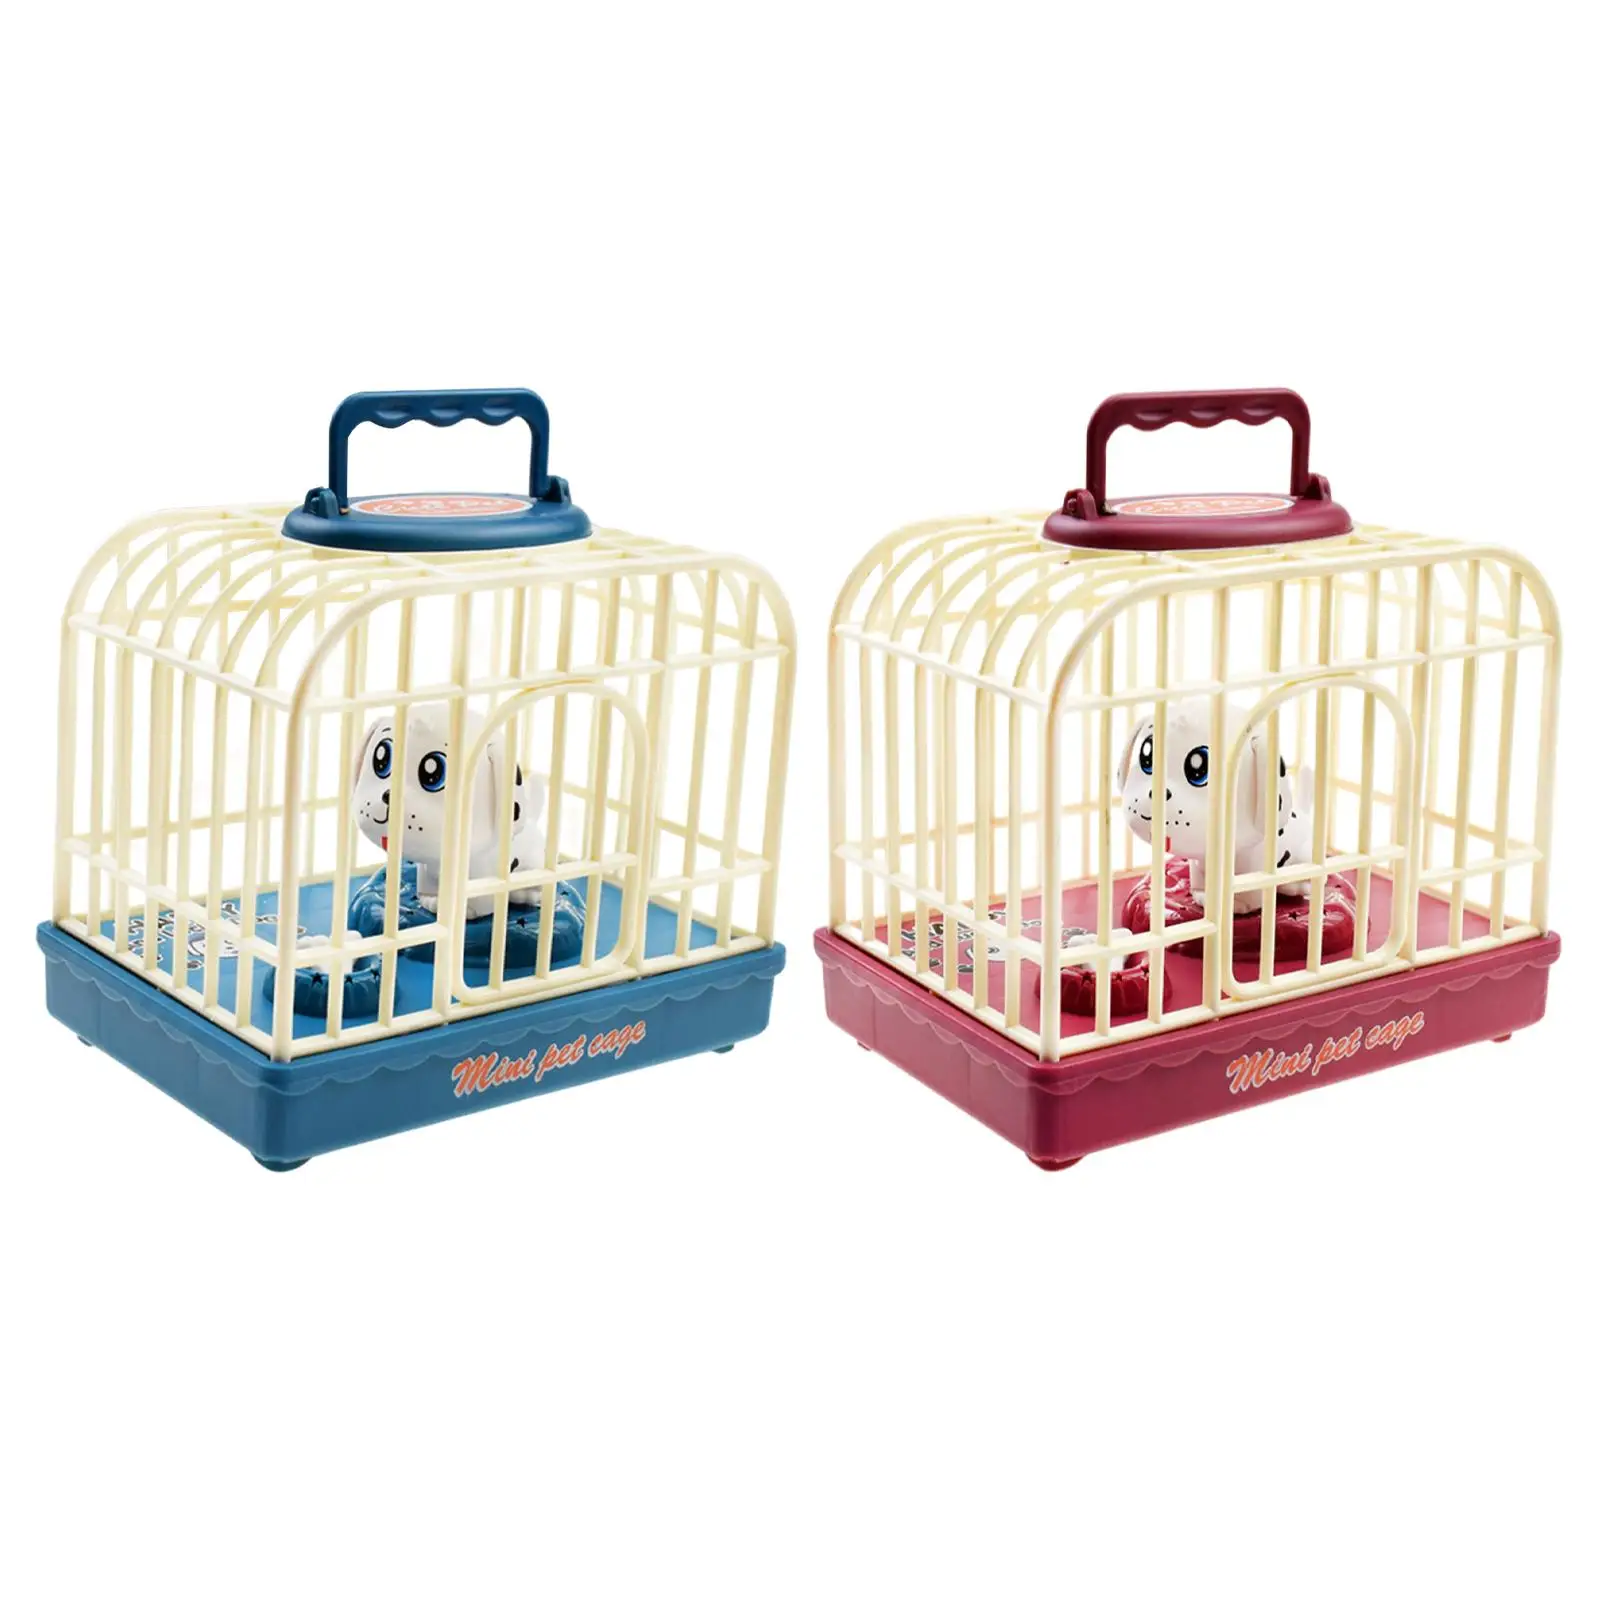 Dog Cage Toy Sound Control, Battery Powered for Toddler Child 6 Months and up Birthday Gifts